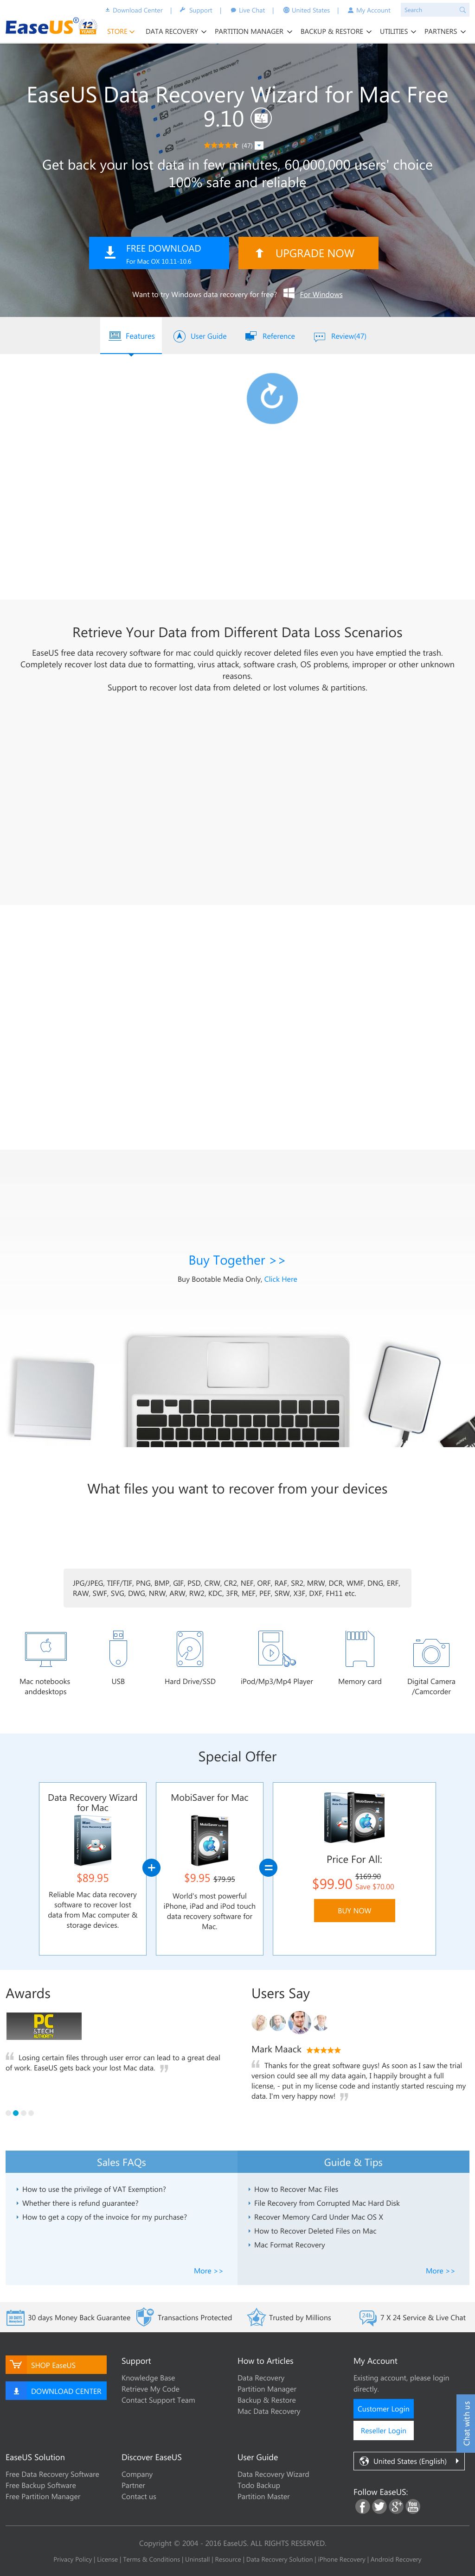 easeus data recovery software for mac